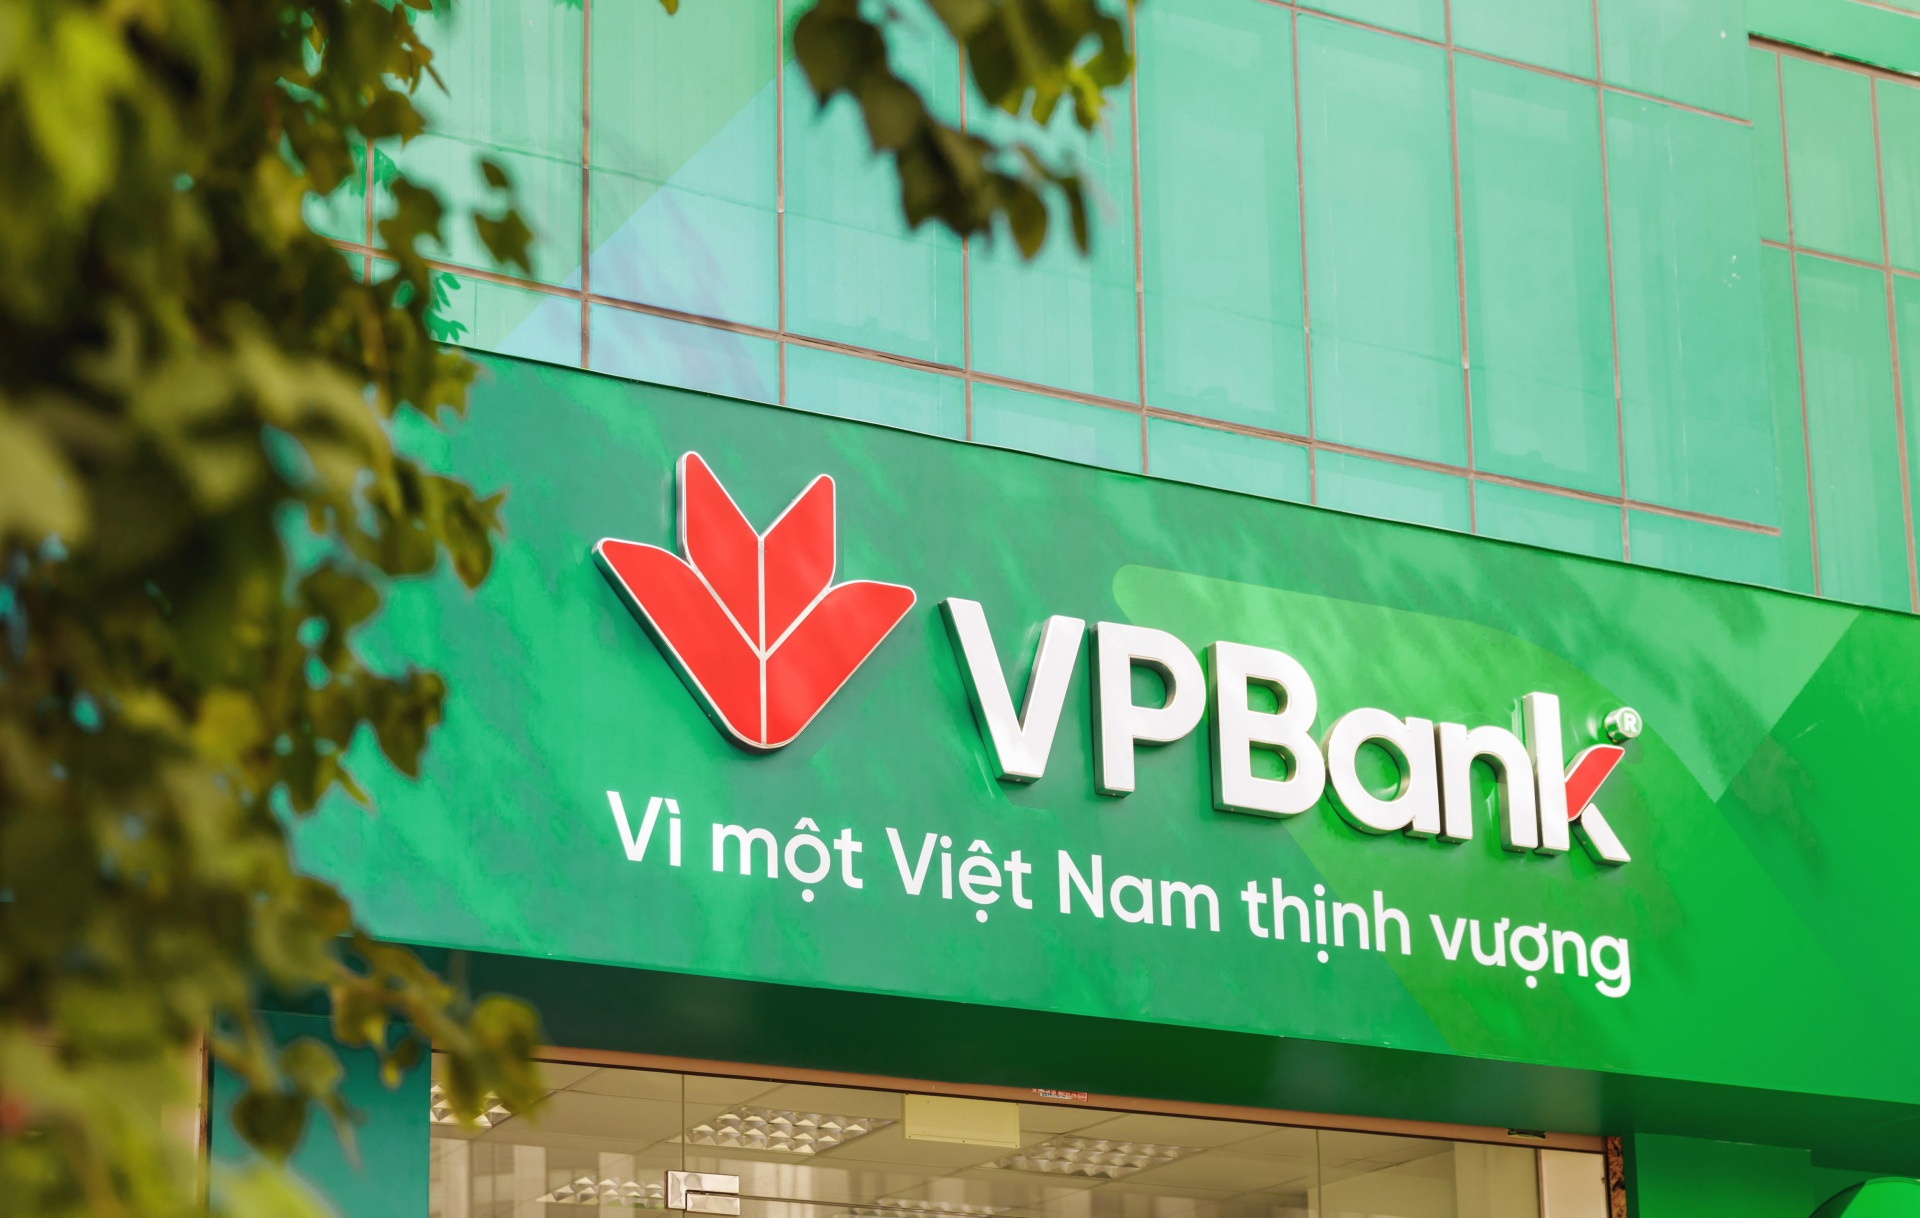 VPBank has received a 10 per cent deposit from SMBC